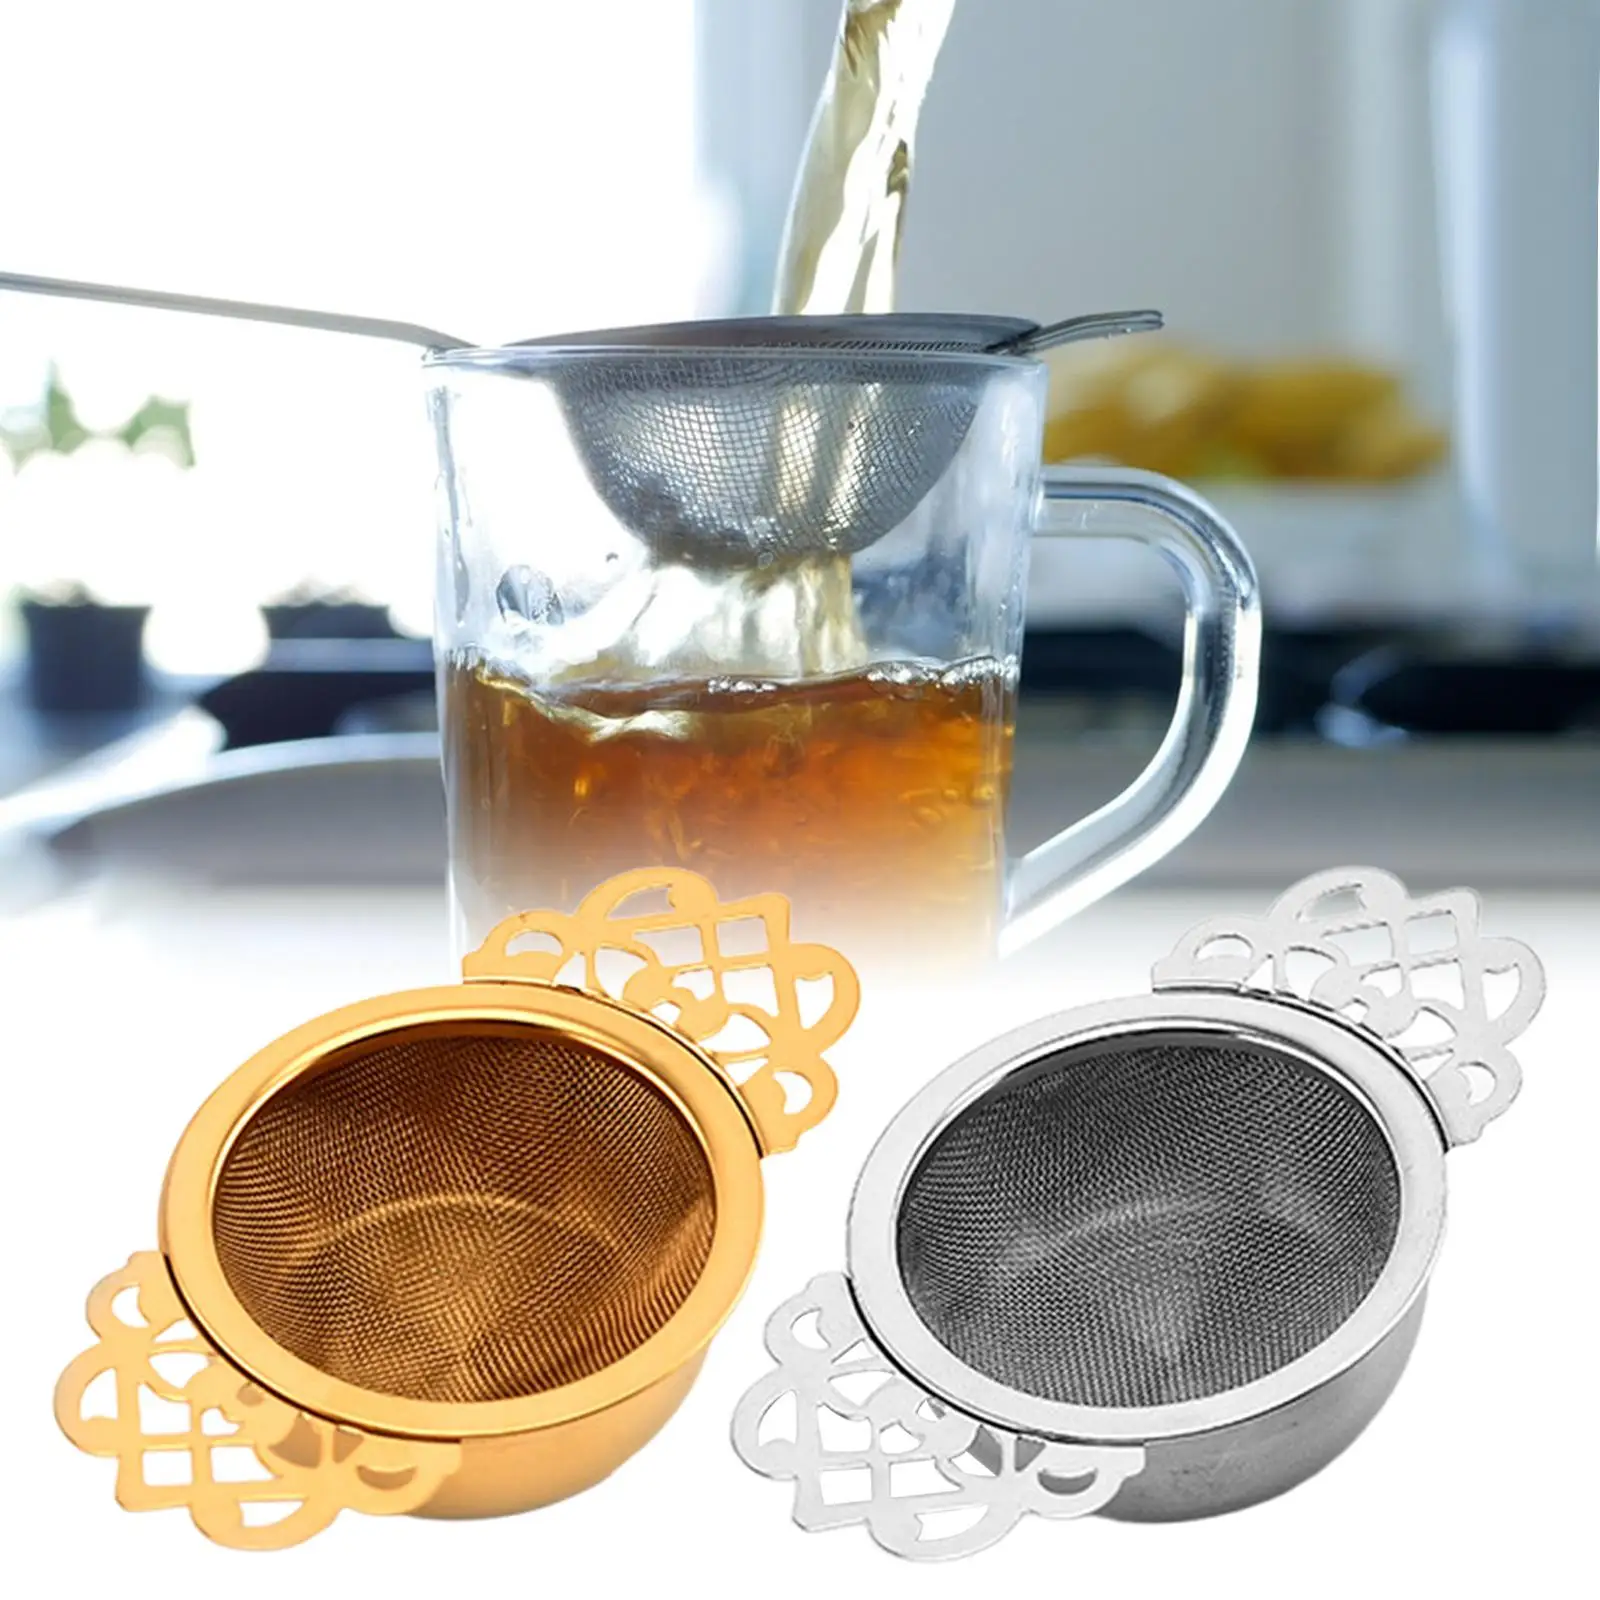 Tea Infuser with Drip Bowl Stainless Steel Tea Strainer for Loose Leaf